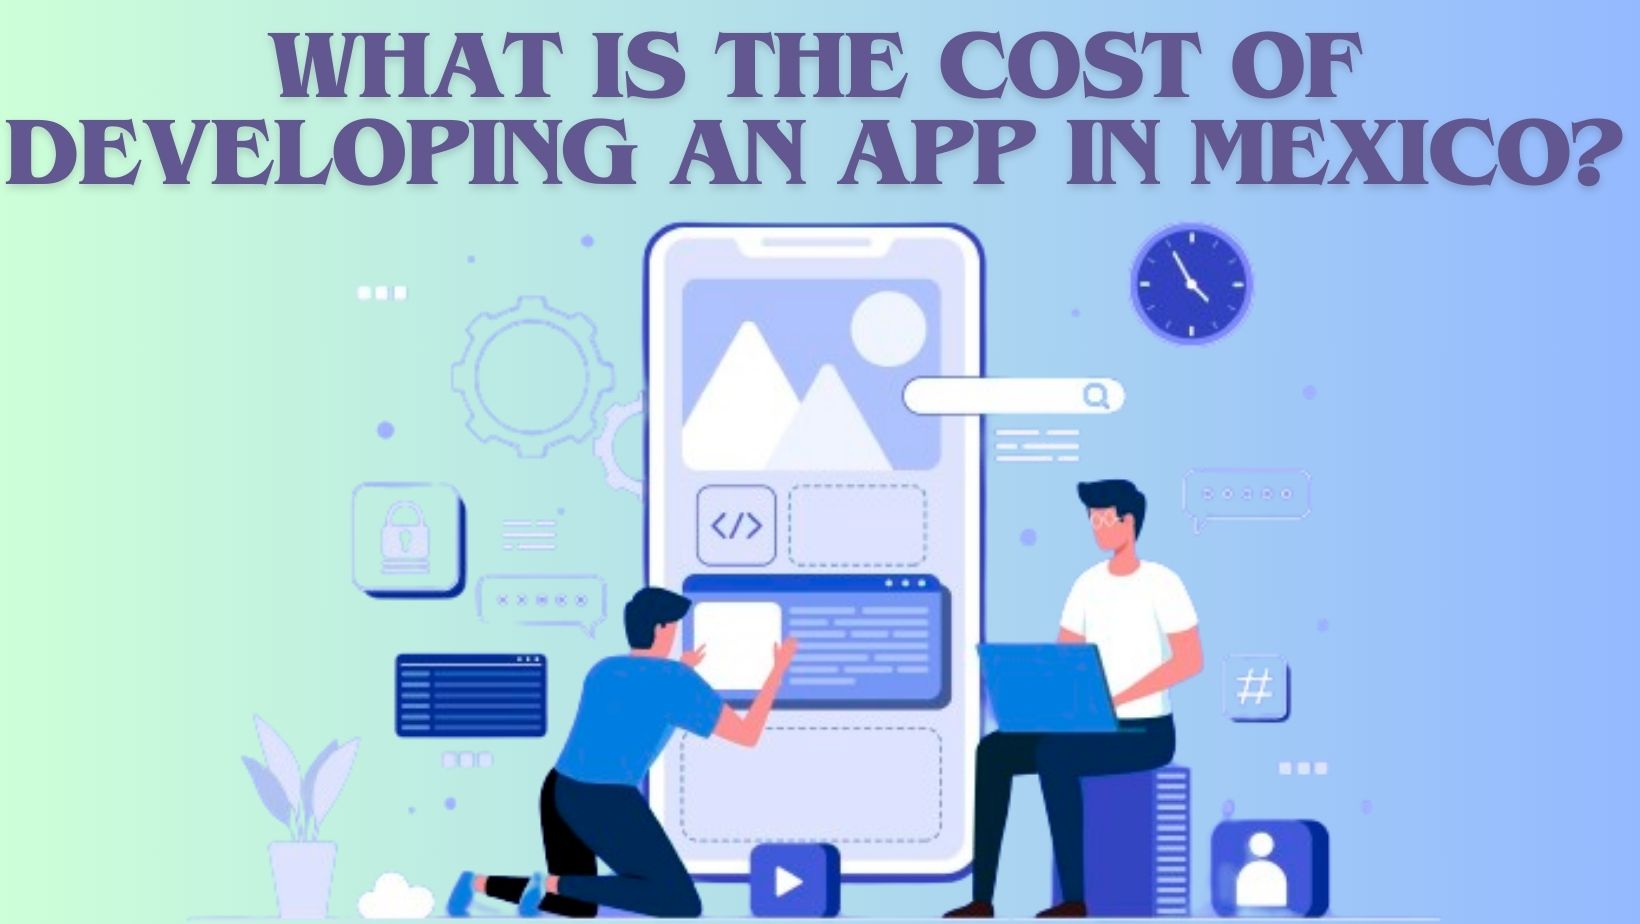 What is the cost of developing an app in Mexico?